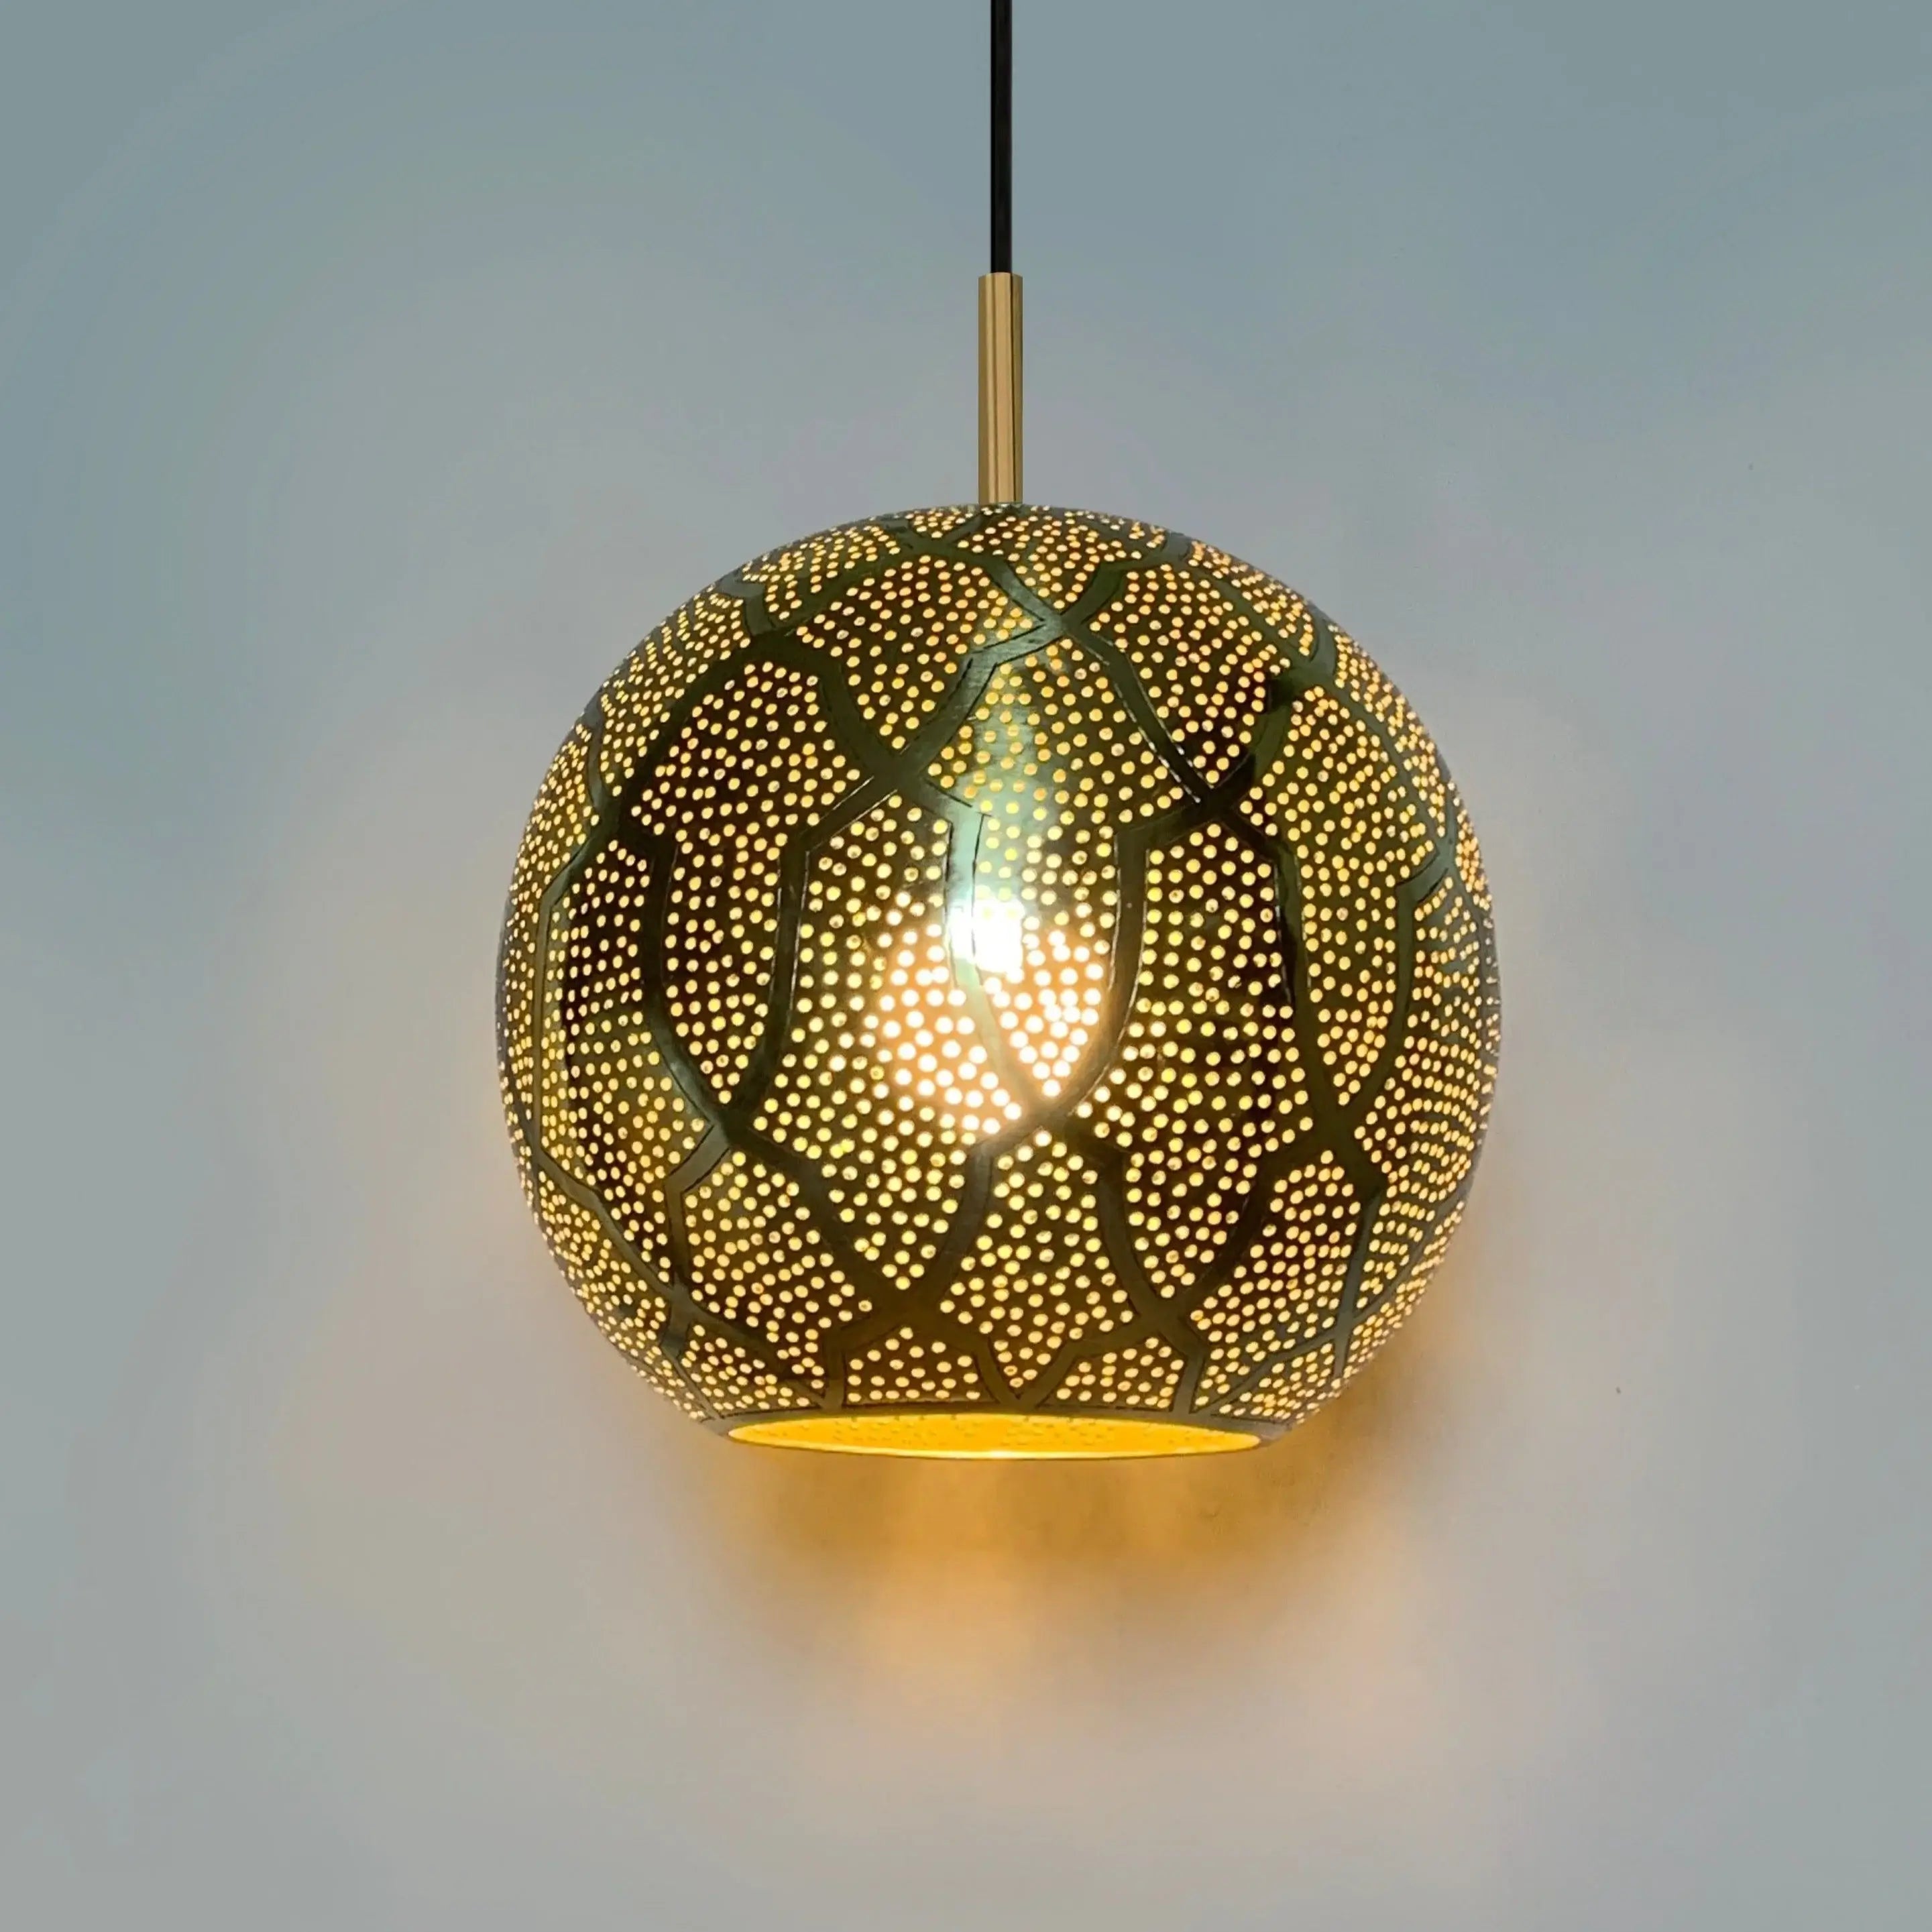 Dounia home Pendant light in polished brass  made of Metal, Model: ARI